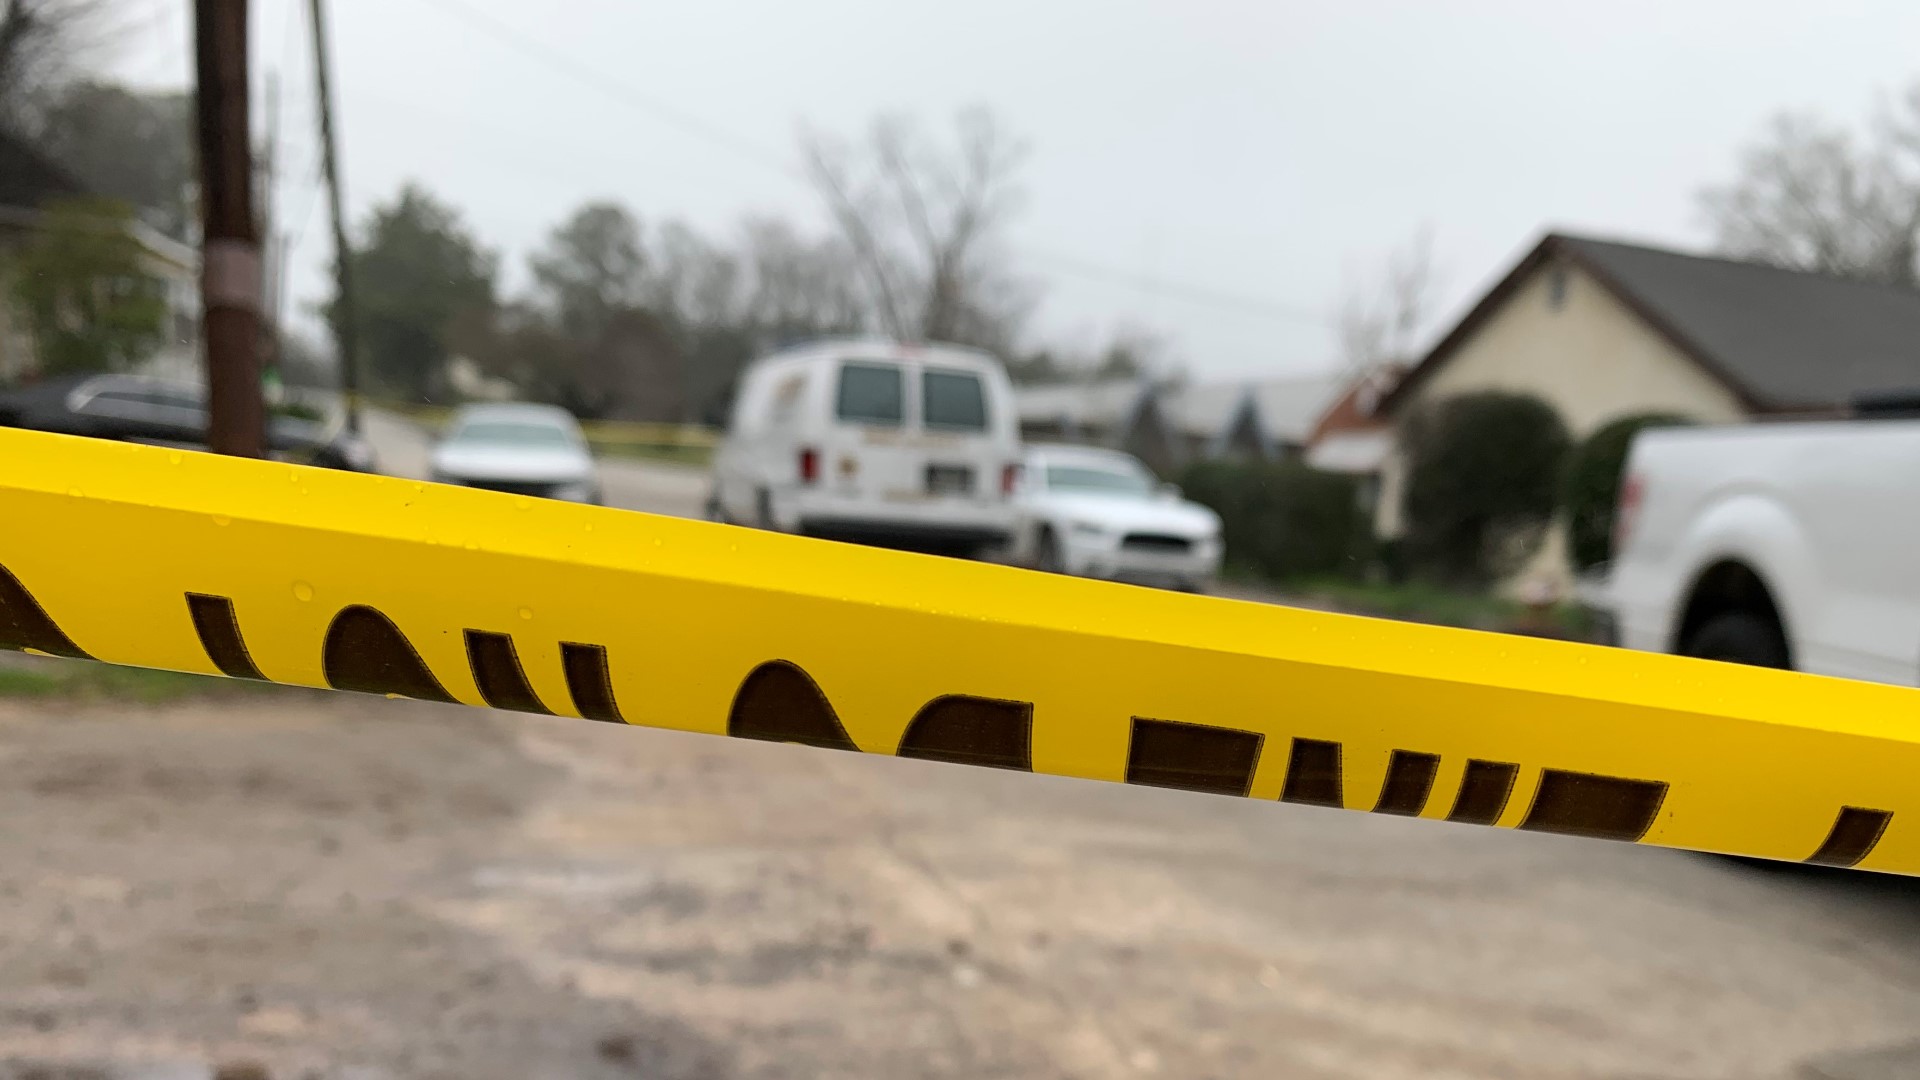 The Bibb County Sheriff's Office is investigating after a man was shot in the head in Macon.